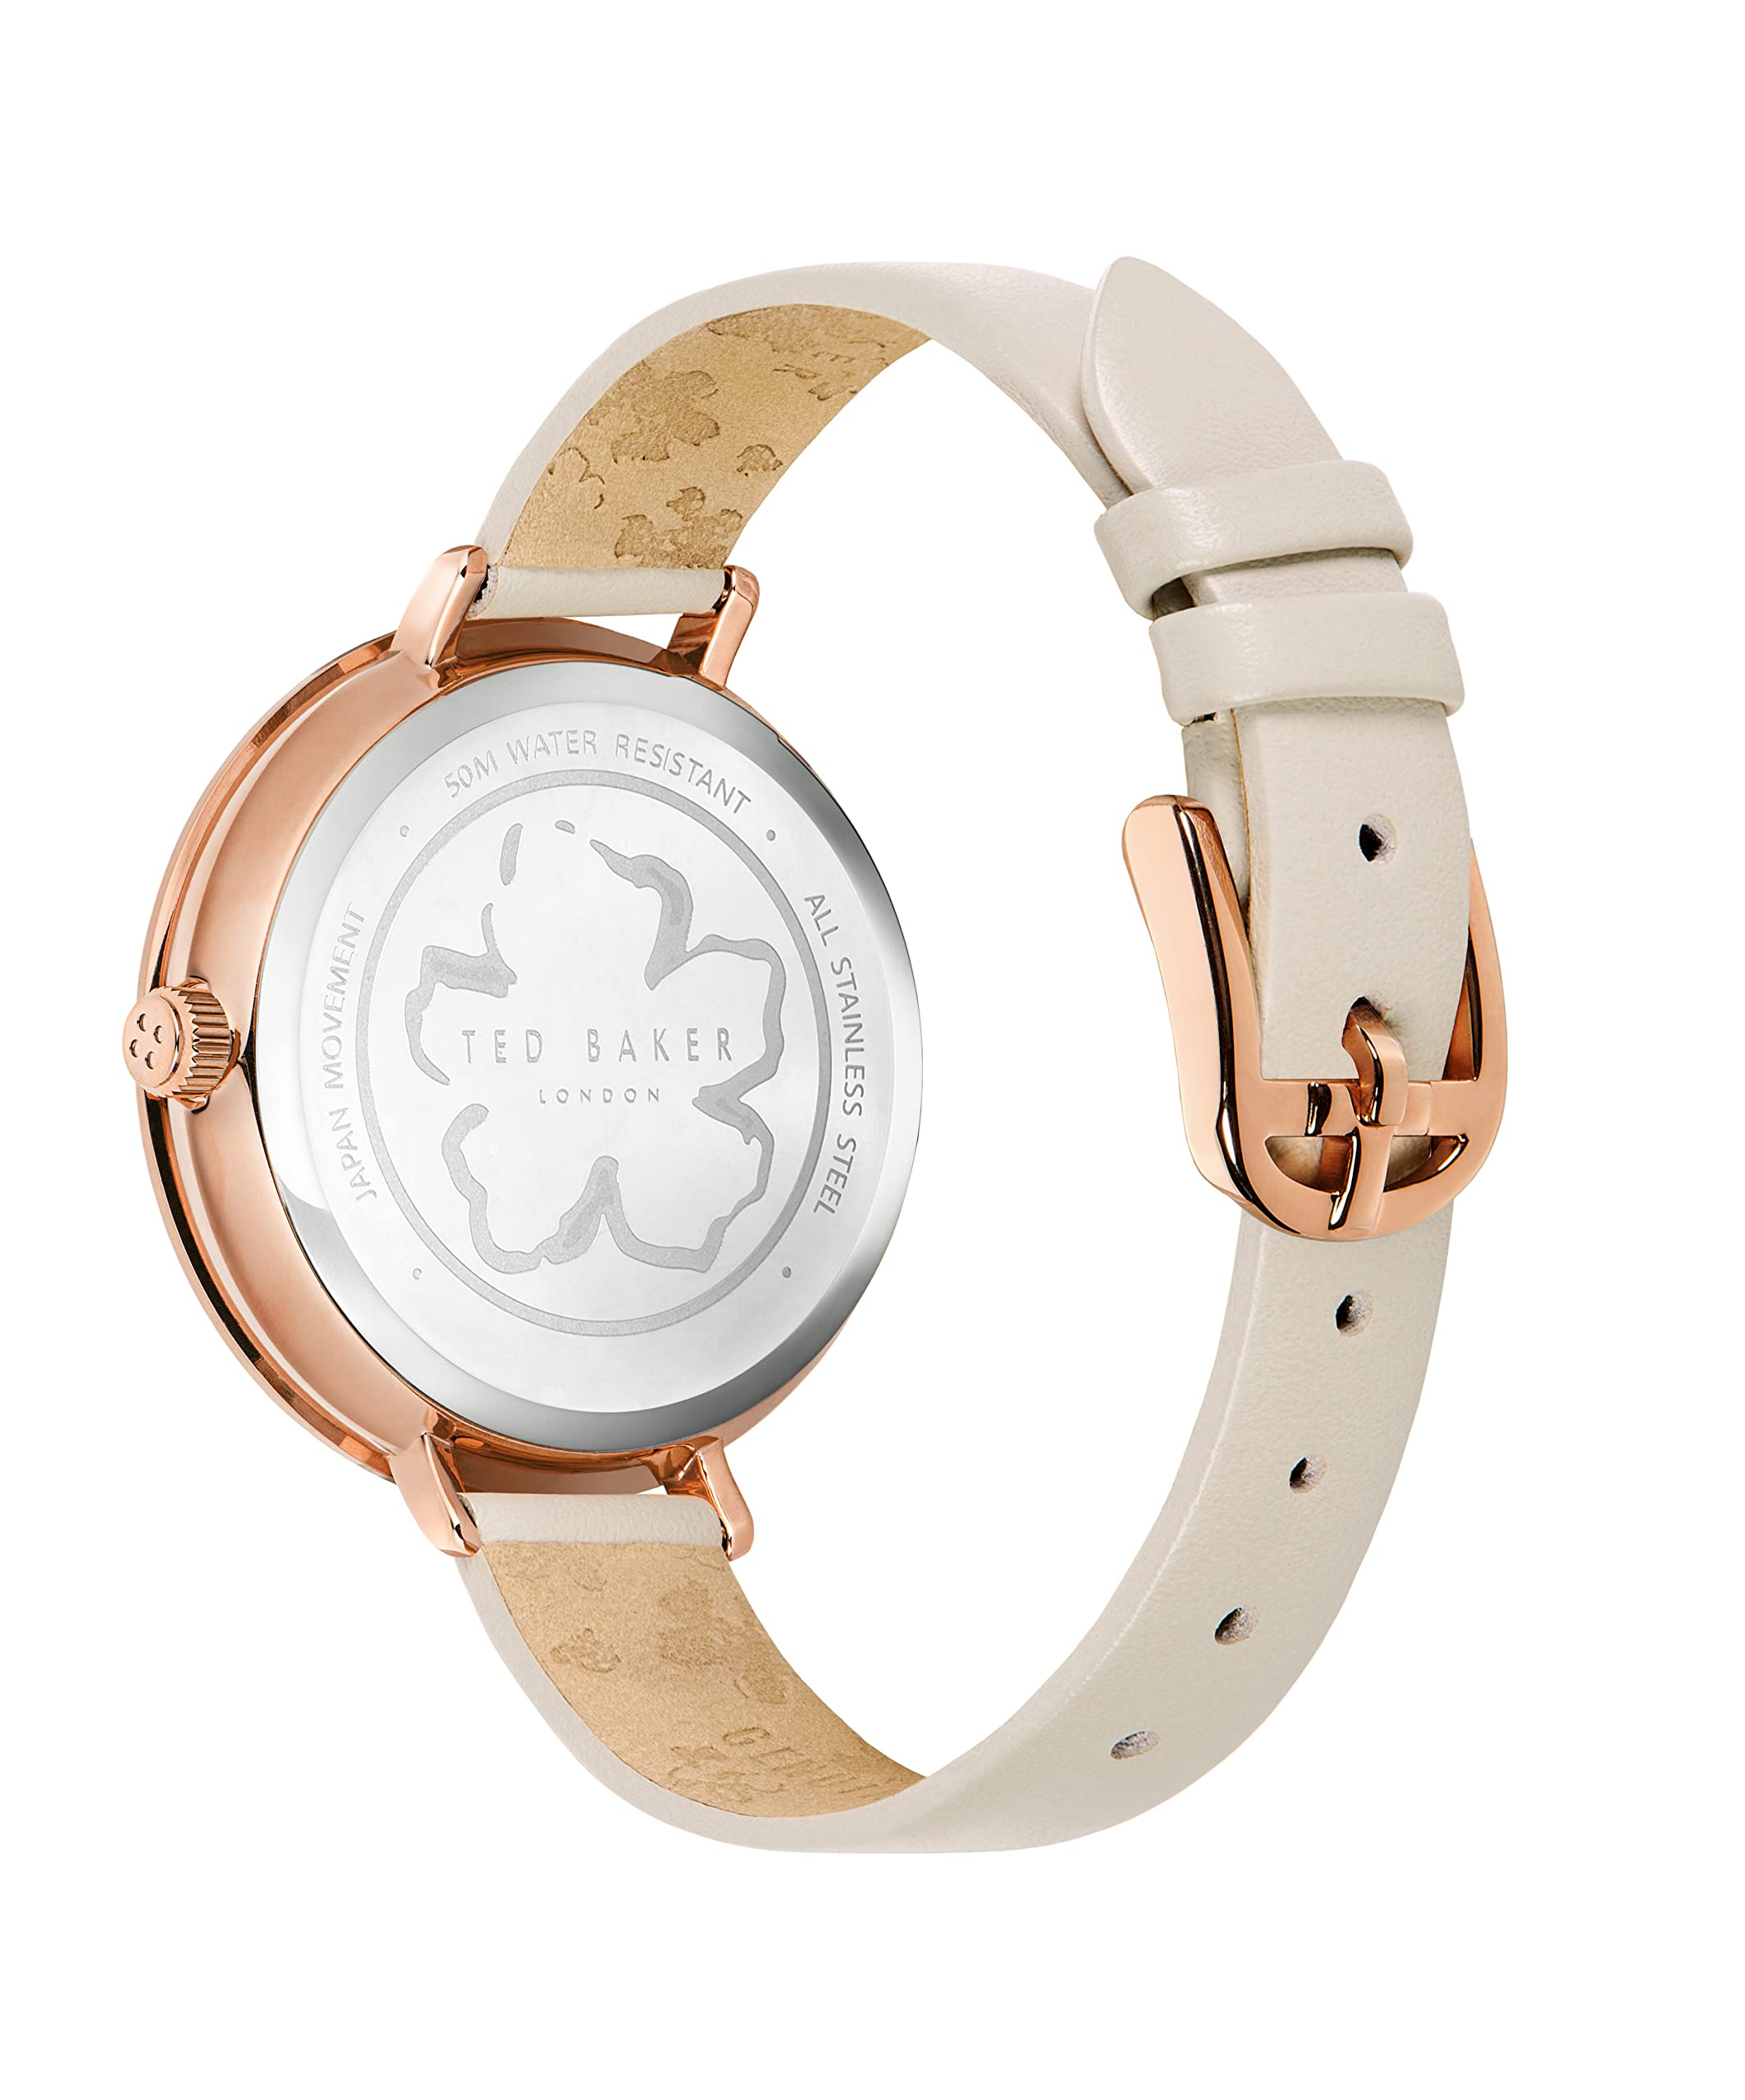 Ted Baker Women's Stainless Steel Quartz Leather Strap, Beige, 12 Casual Watch (Model: BKPAMS2149I), Rose Gold/Champagne/Cream